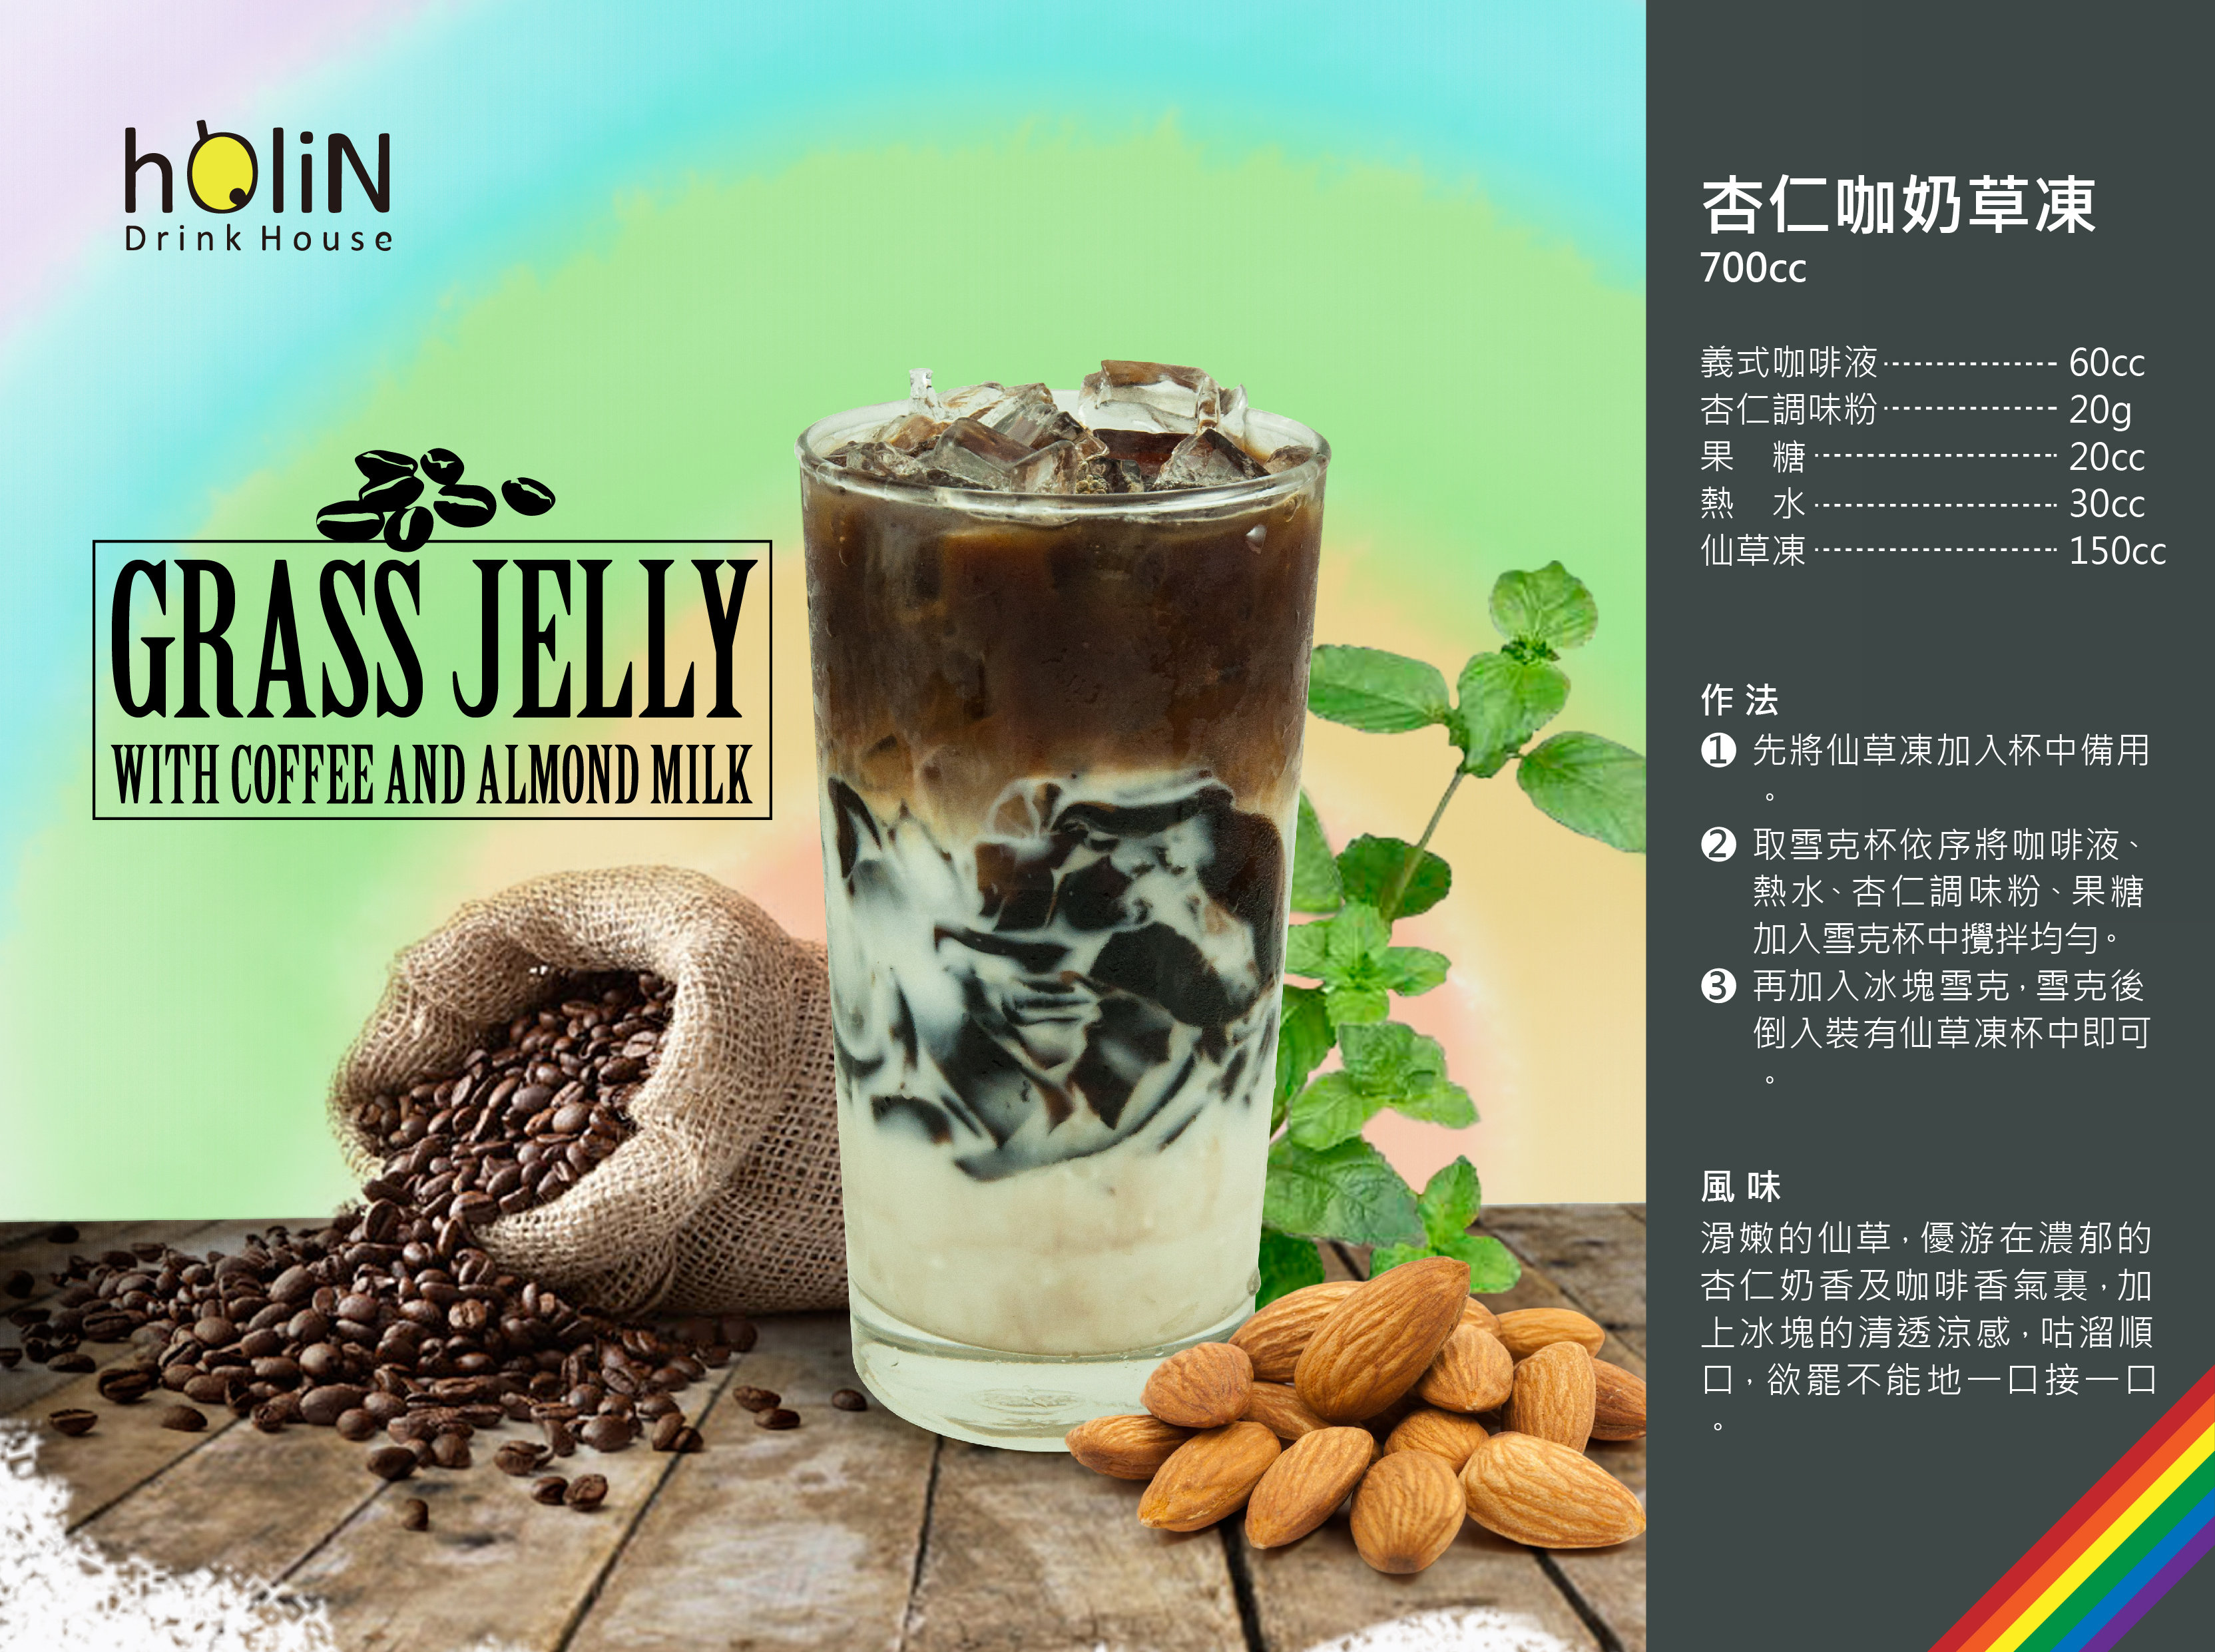 Grass jelly with coffee and almond milk